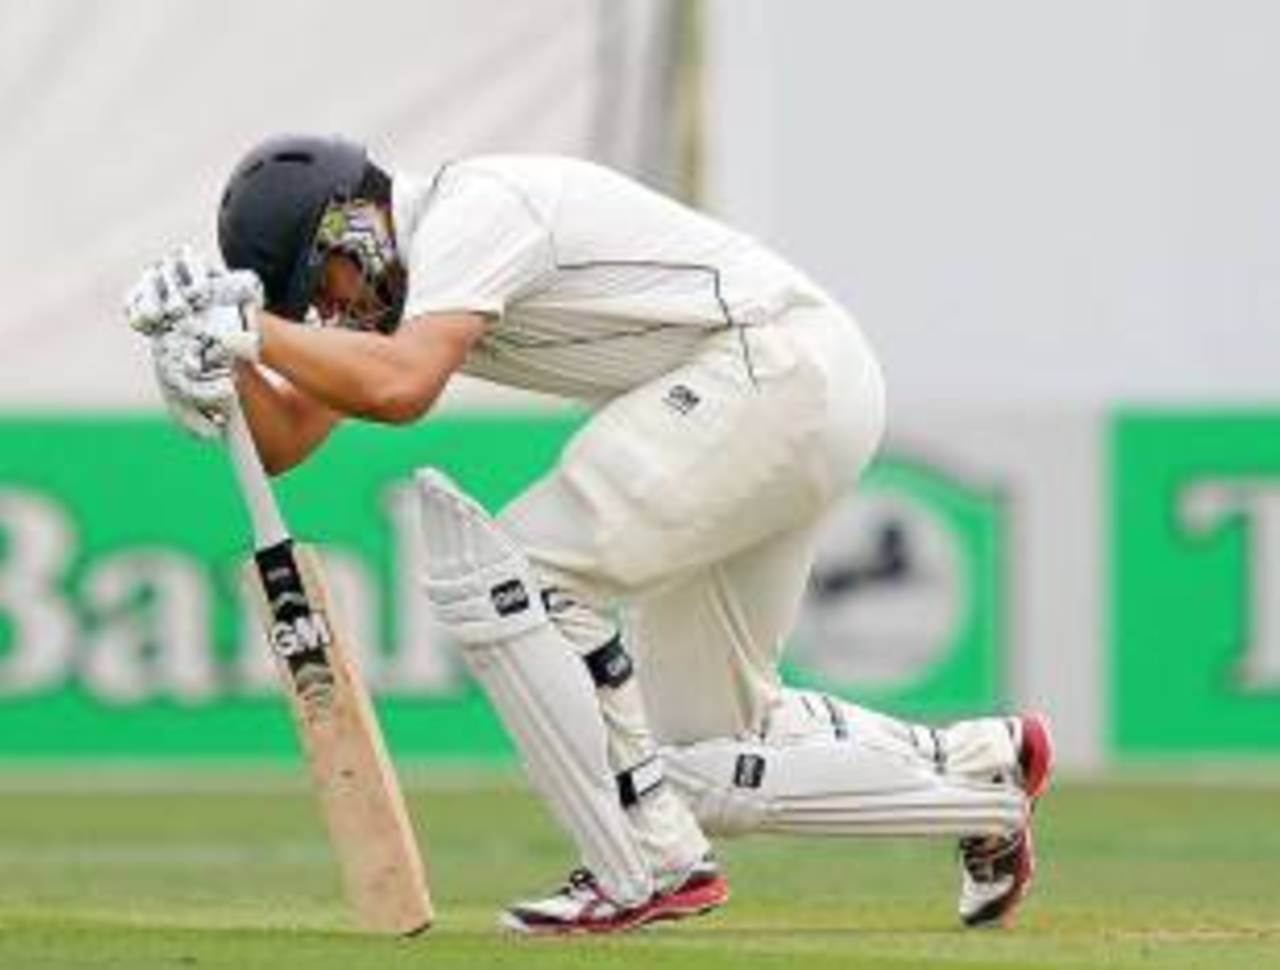 Ross Taylor had to retire hurt due to a calf injury, New Zealand v Zimbabwe, Only Test, Napier, 2nd day, January 27, 2012